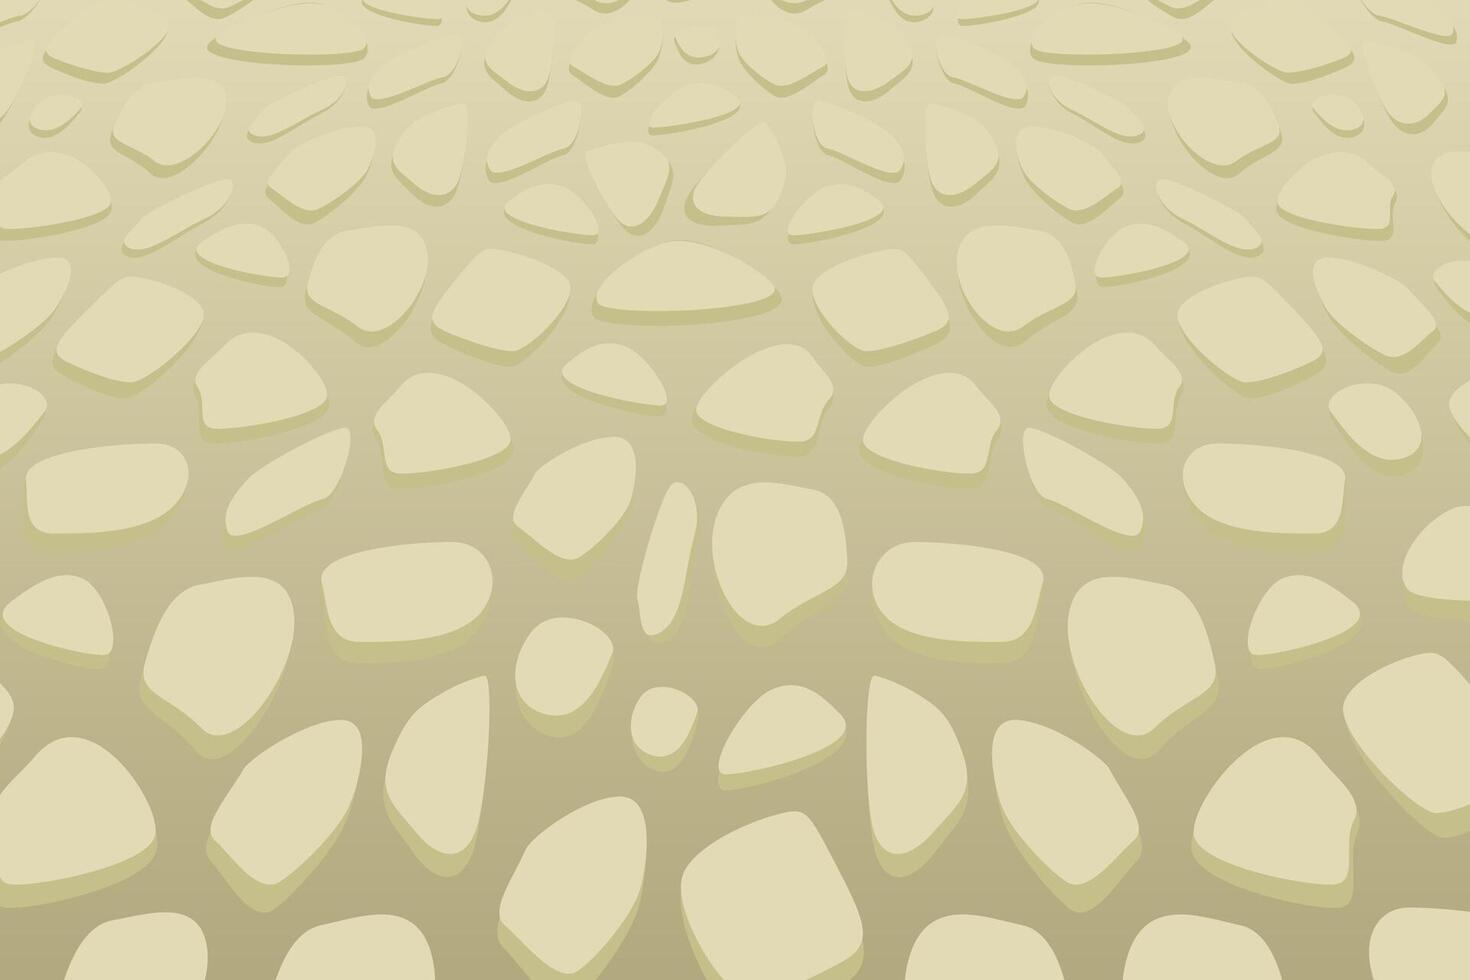 Background and texture of stone floor vector